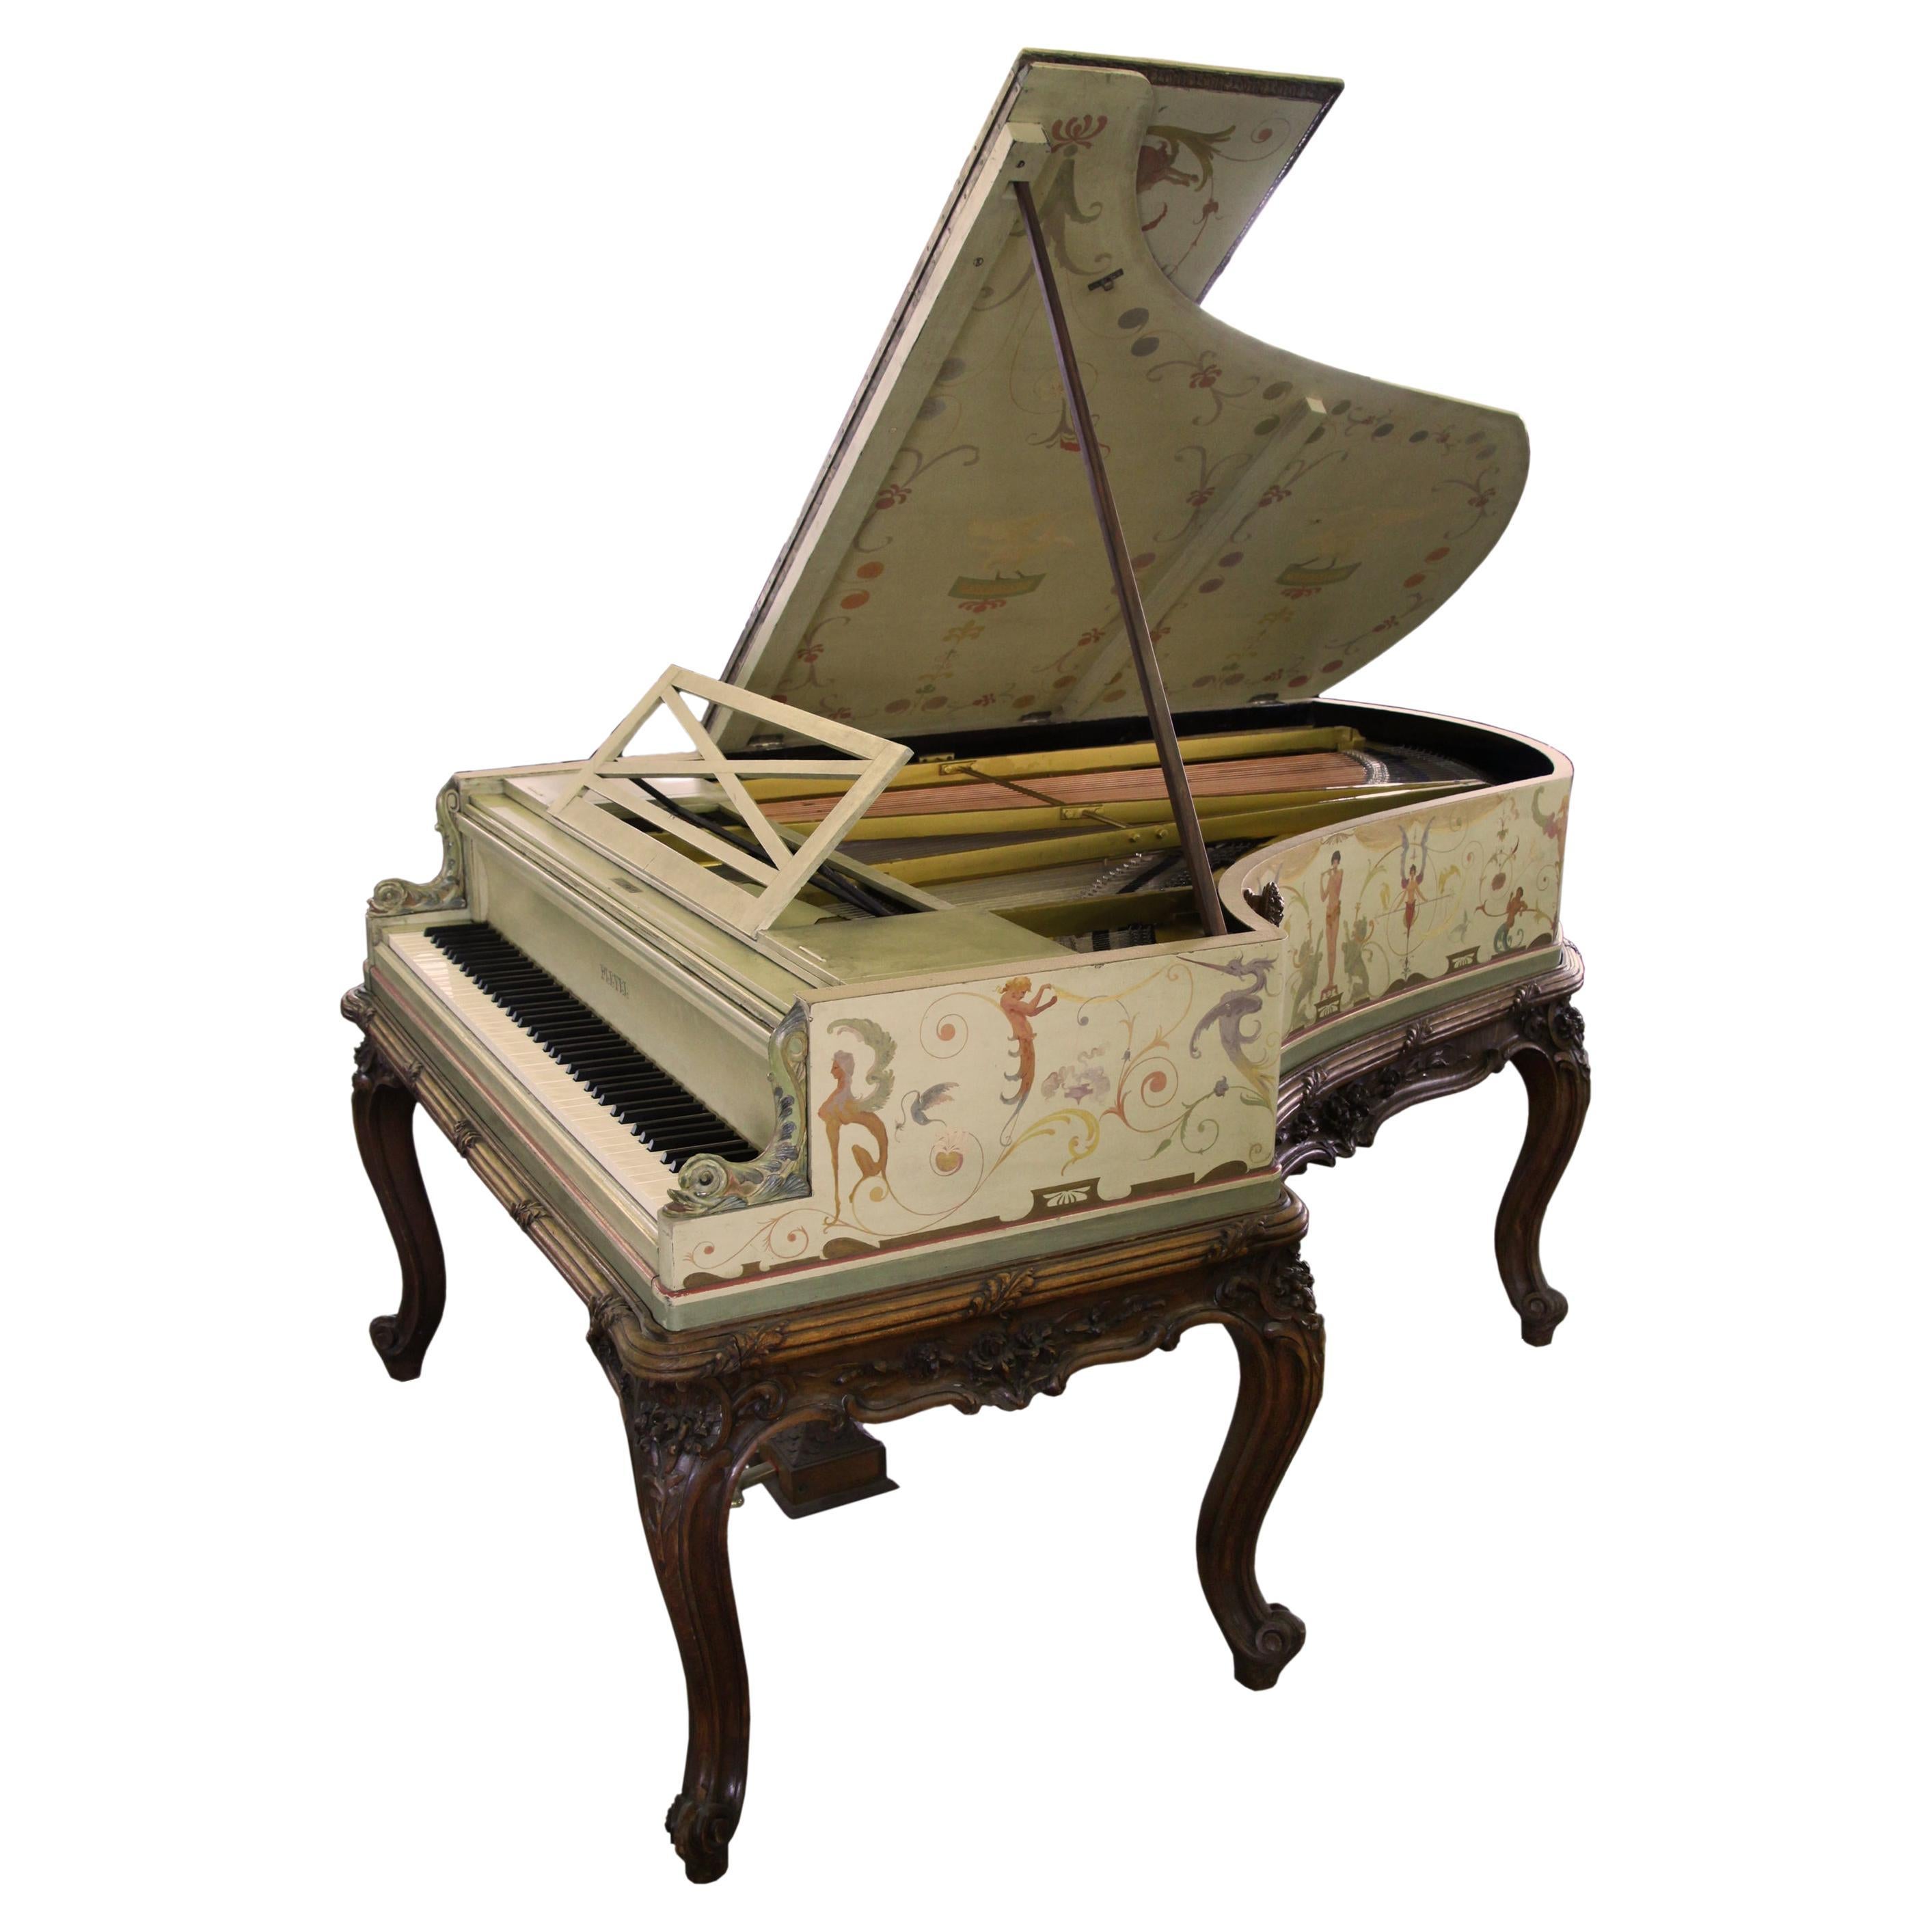 How much is a square grand piano worth?